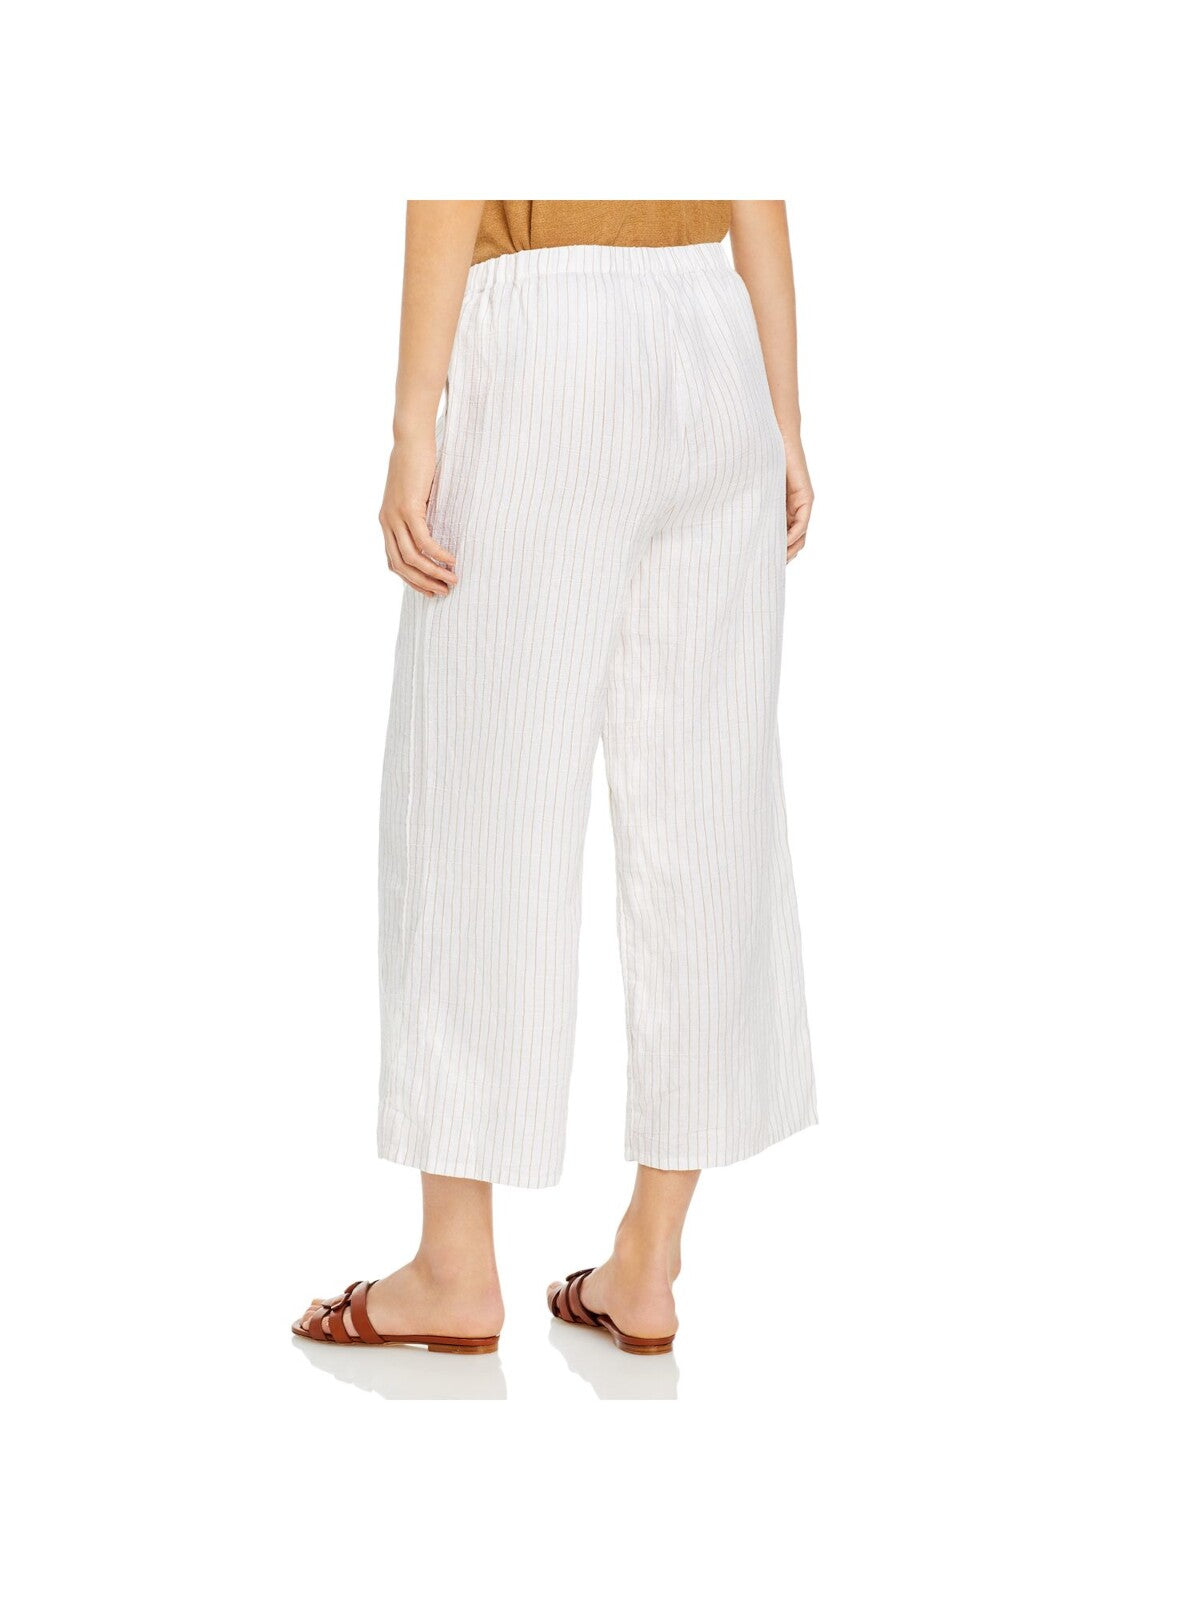 EILEEN FISHER Womens White Pocketed Elastic Waist Pull On Pinstripe Cropped Pants M